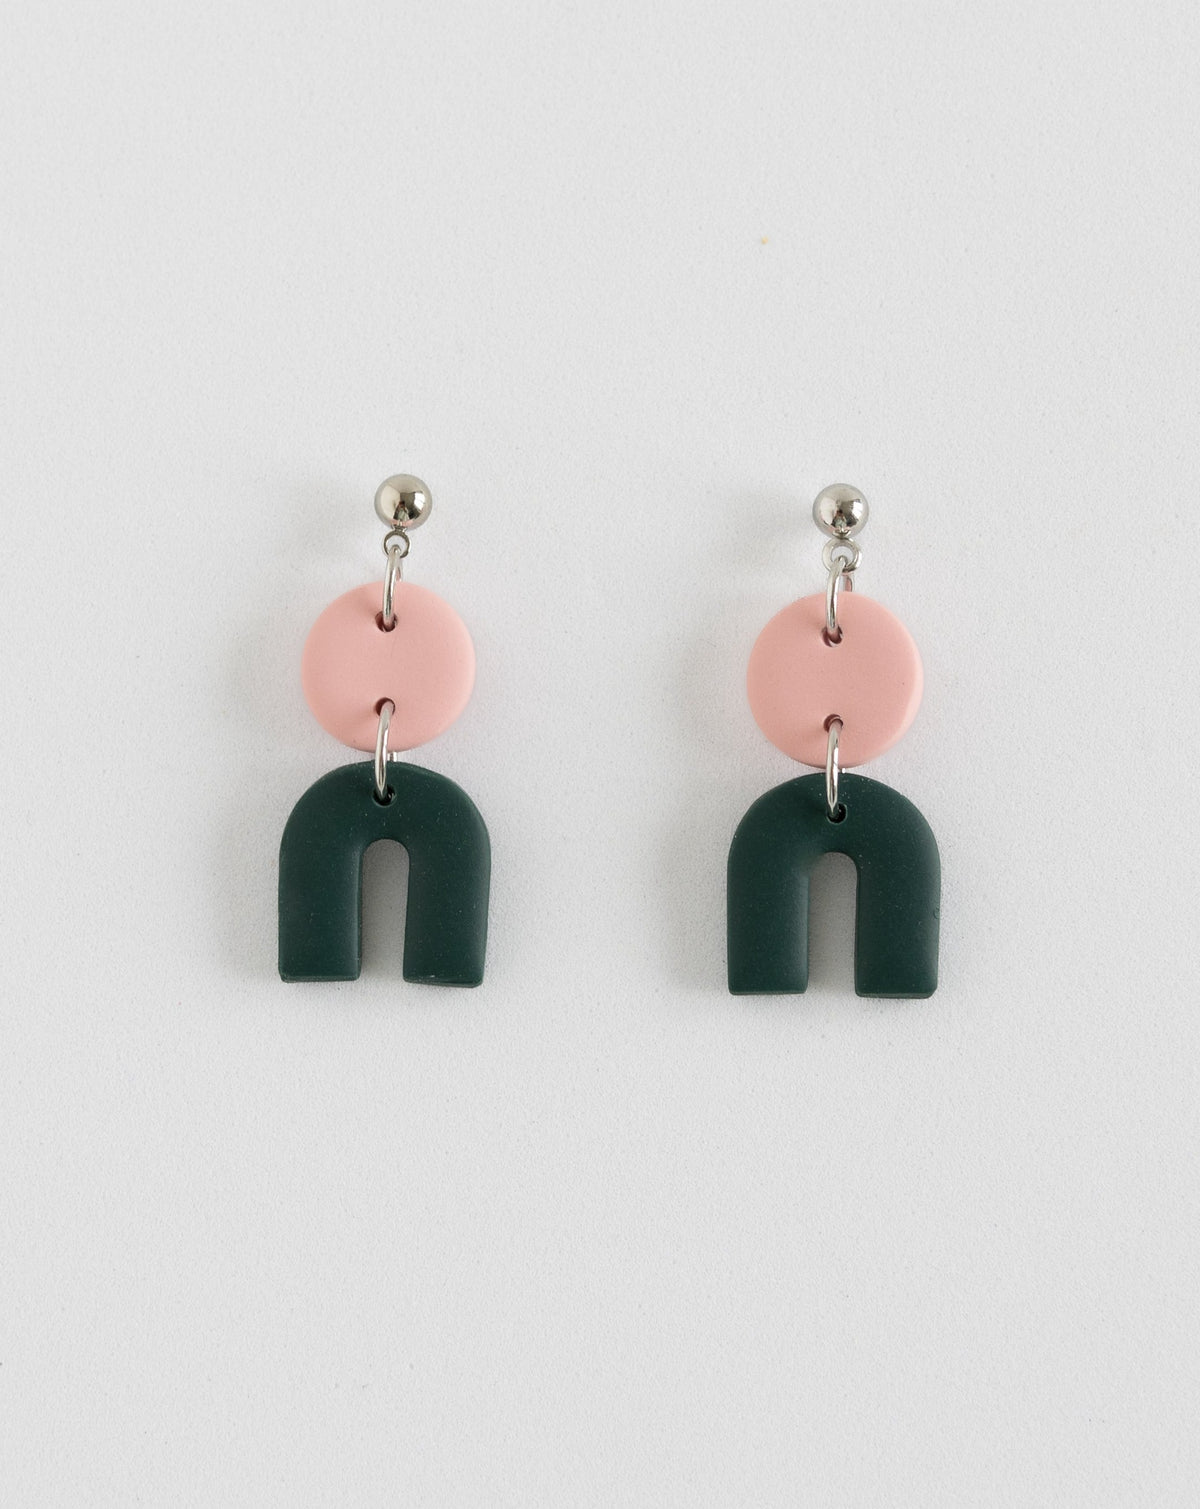 Tiny Arch earrings in two part of pink and pine  clay parts with silver Ball studs, front view.